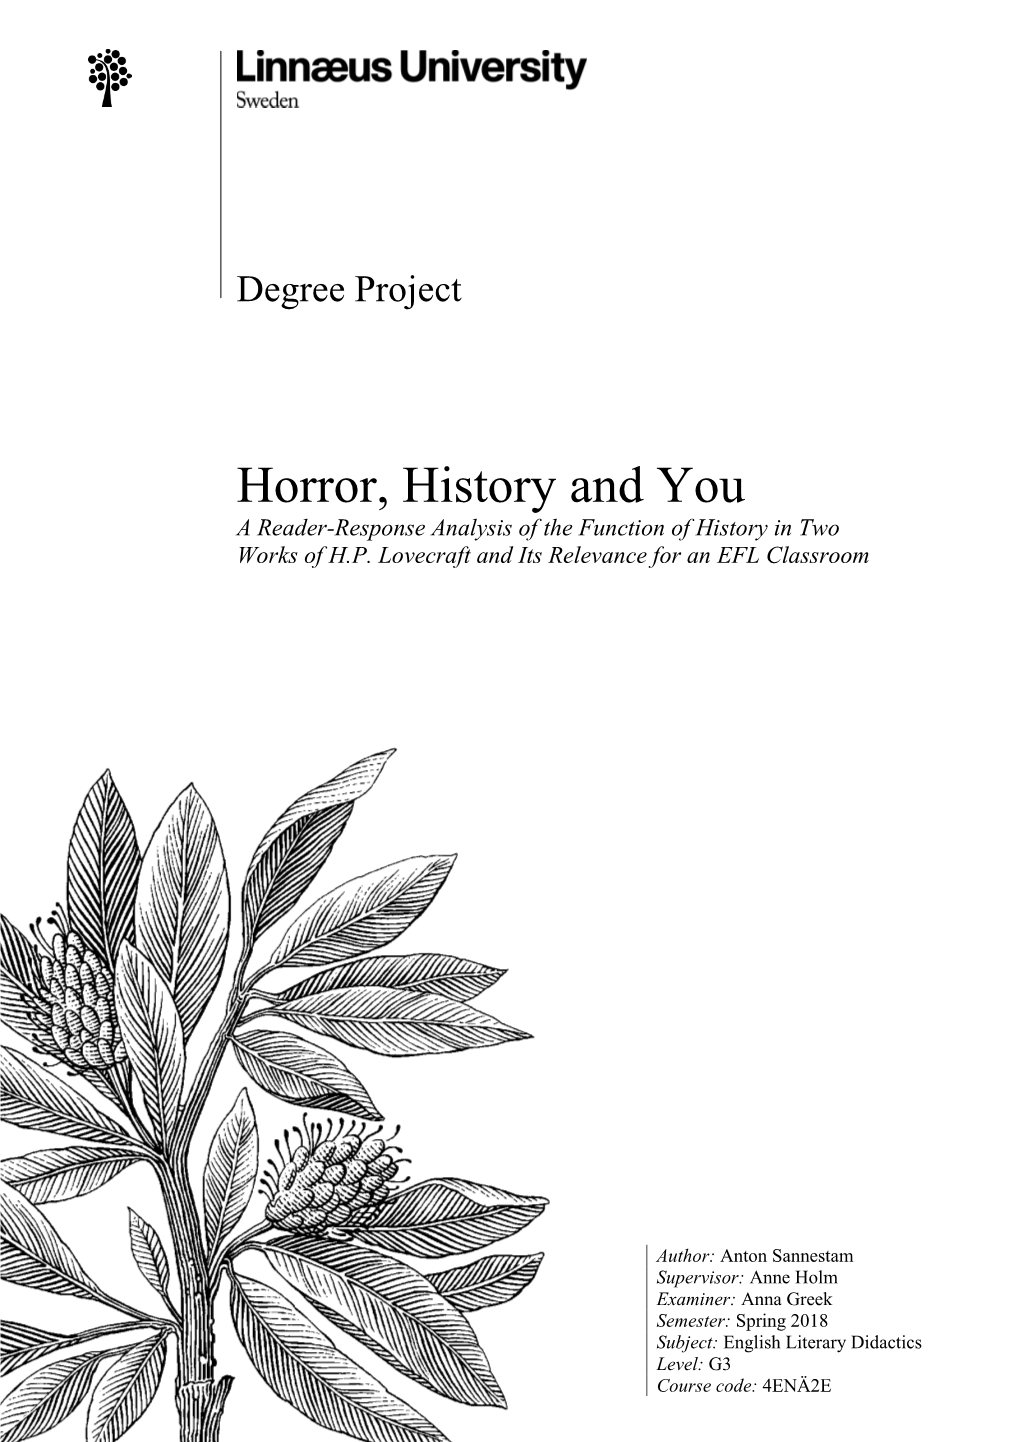 Degree Project Template